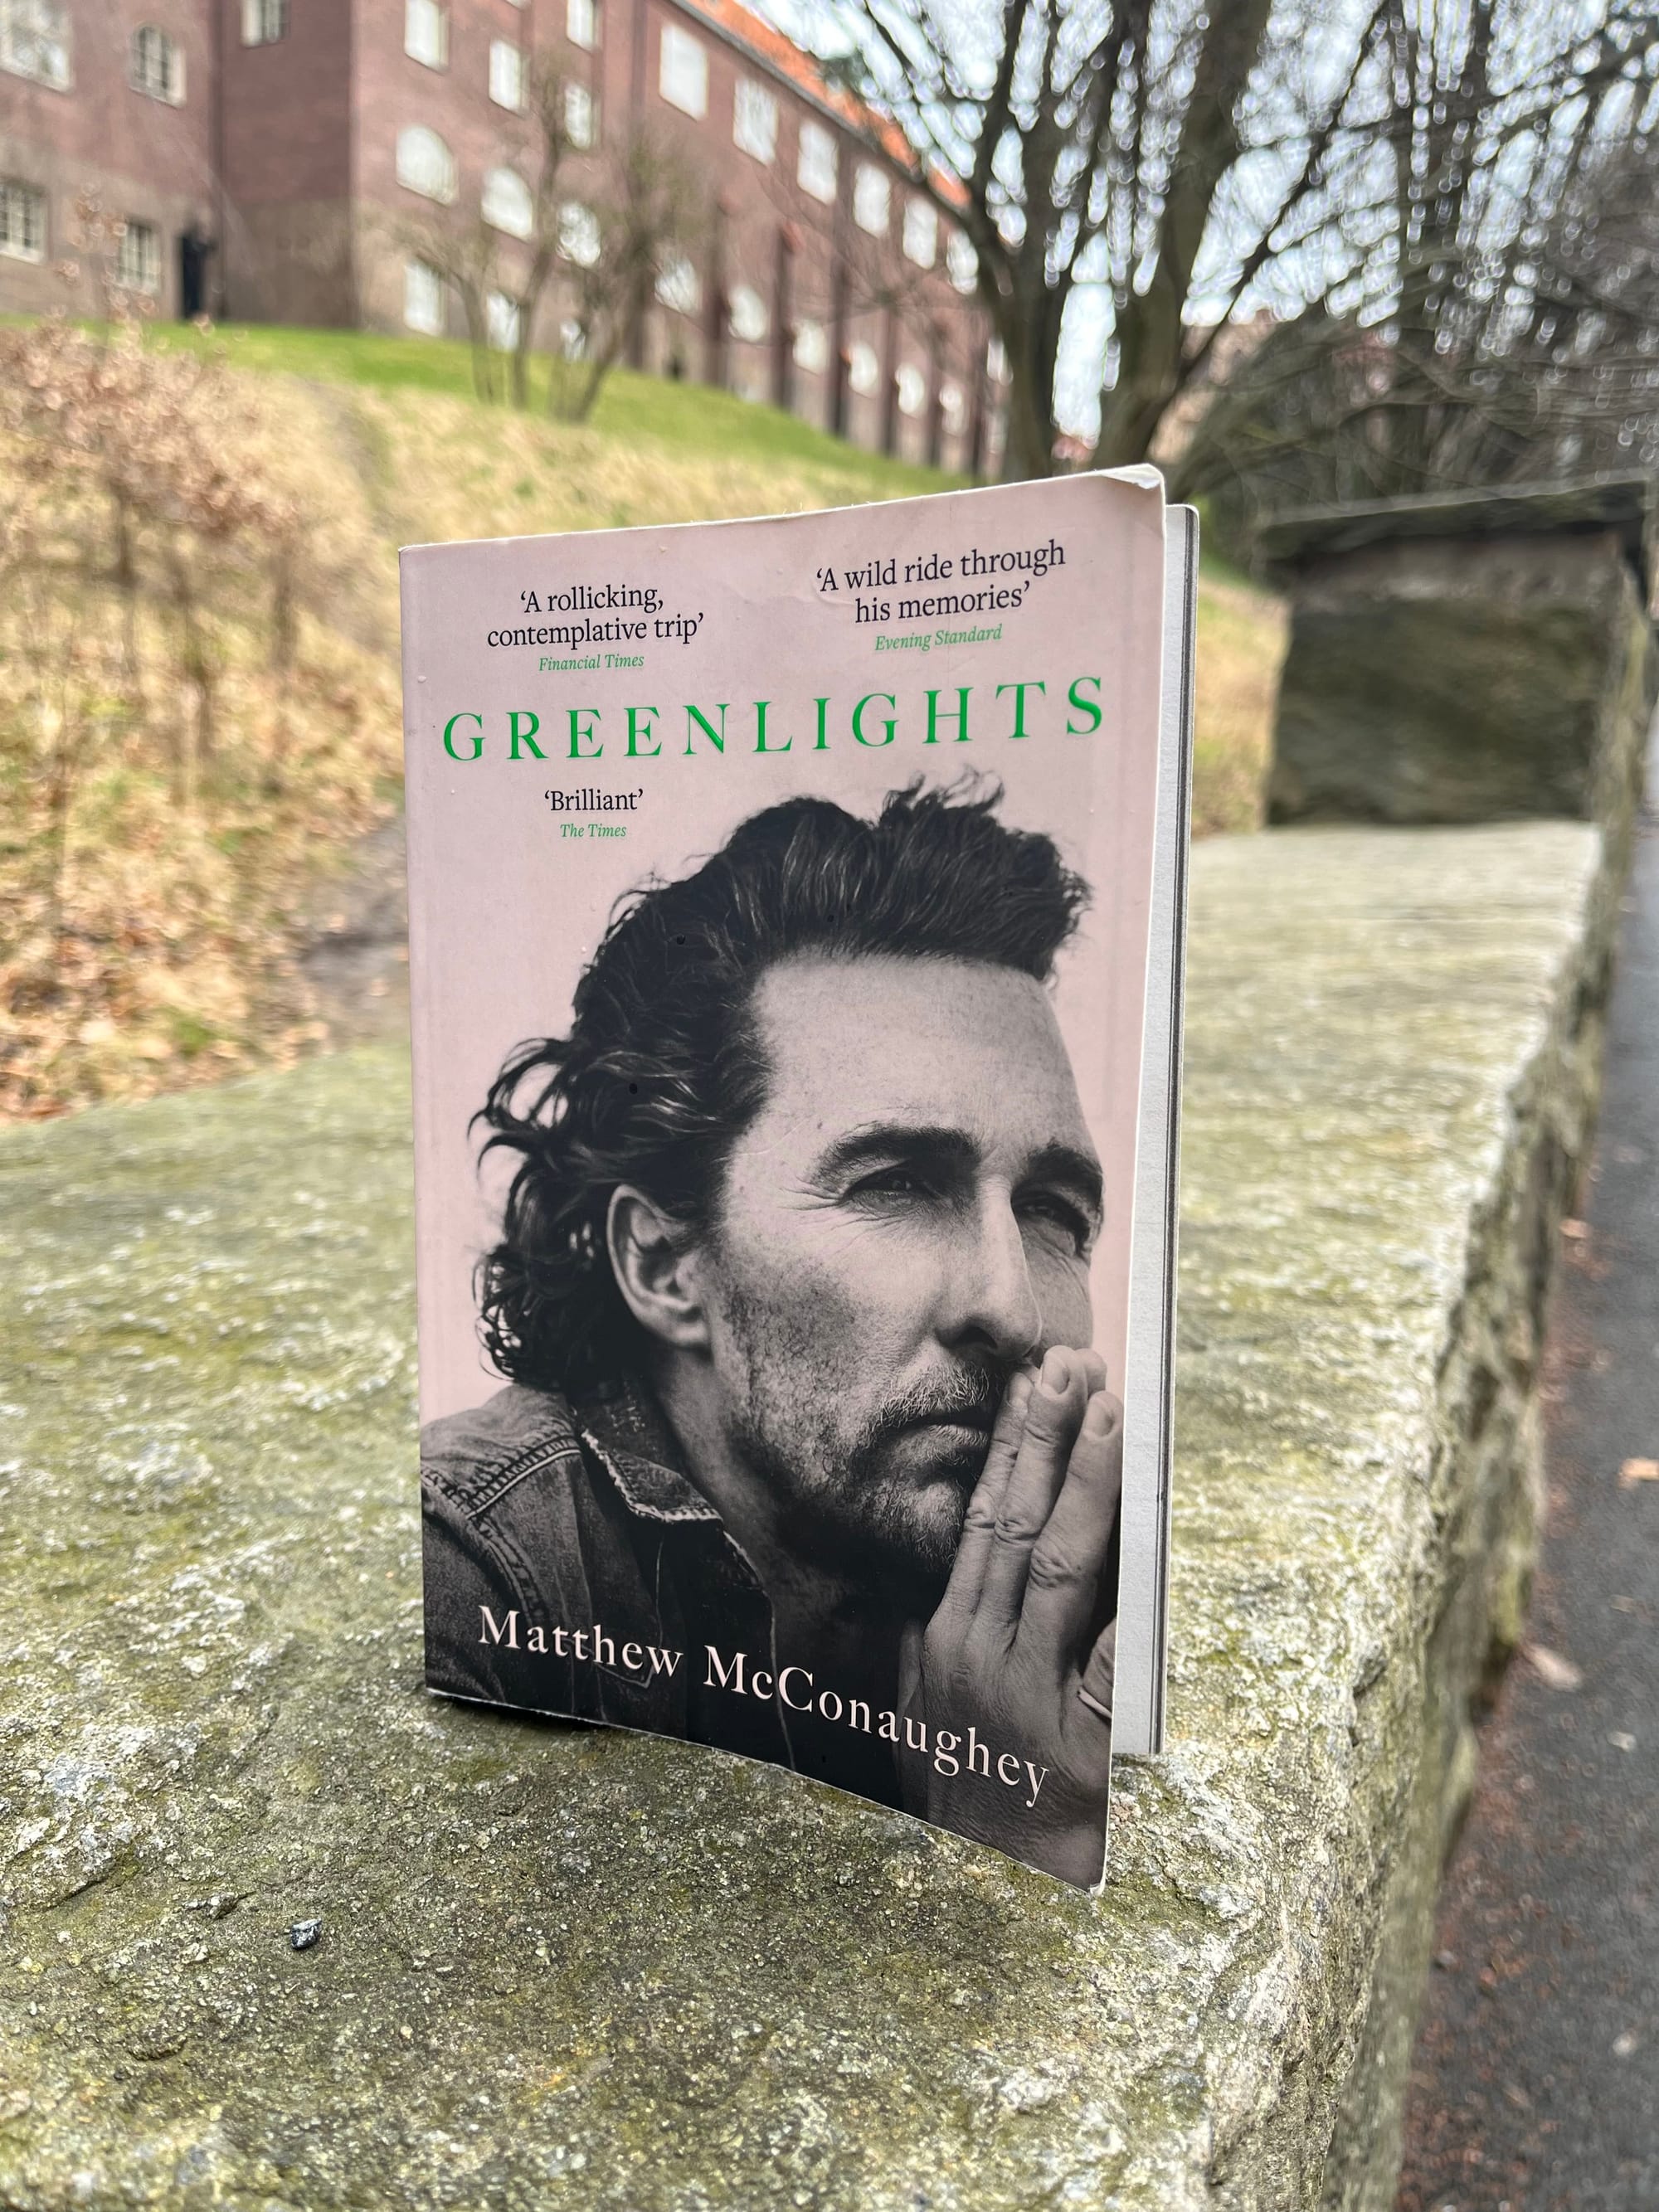 The book "Greenlights" on top of a stone wall with a hill and a brick house in the background